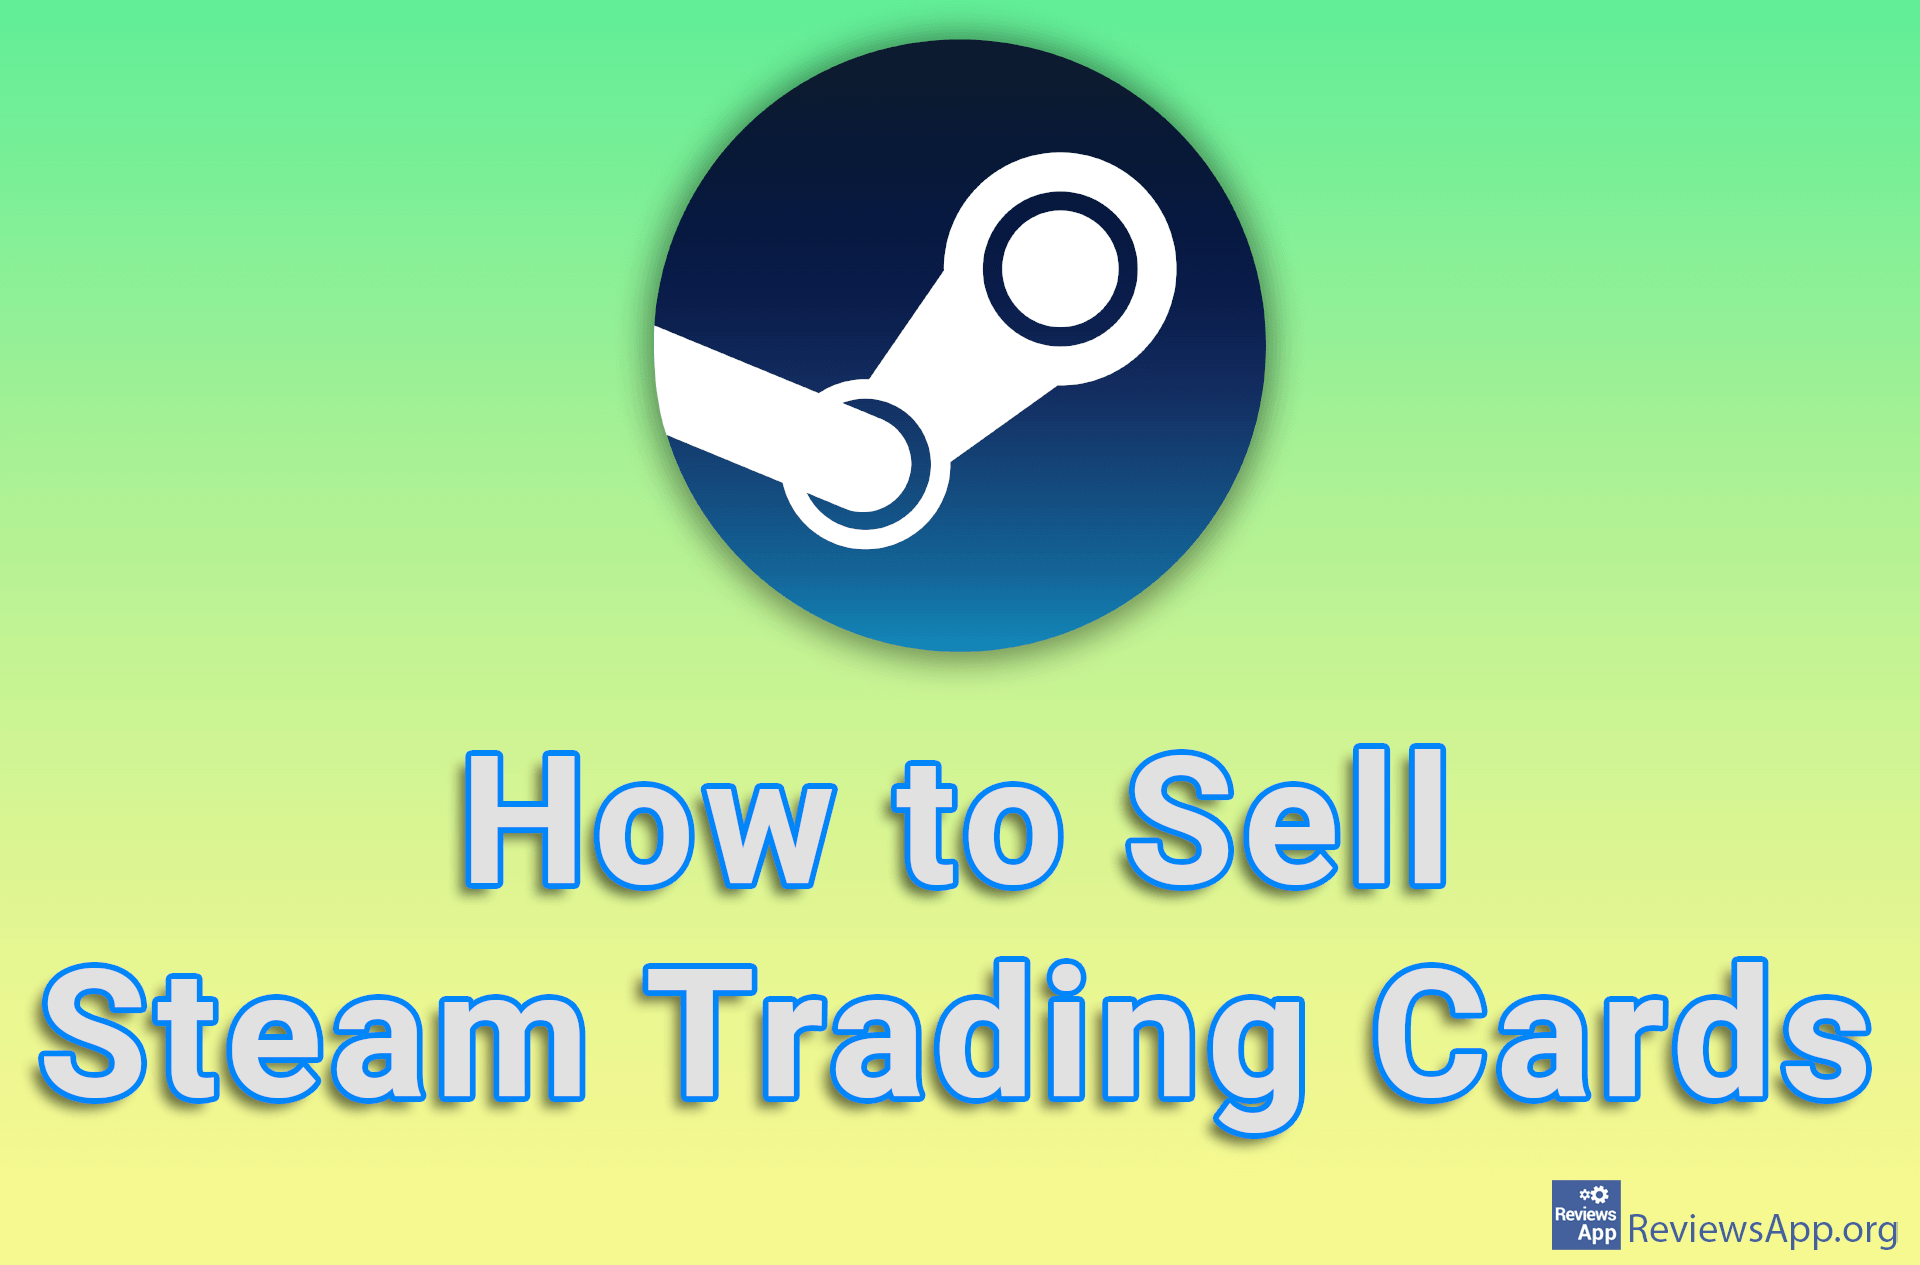 How to Sell Steam Trading Cards